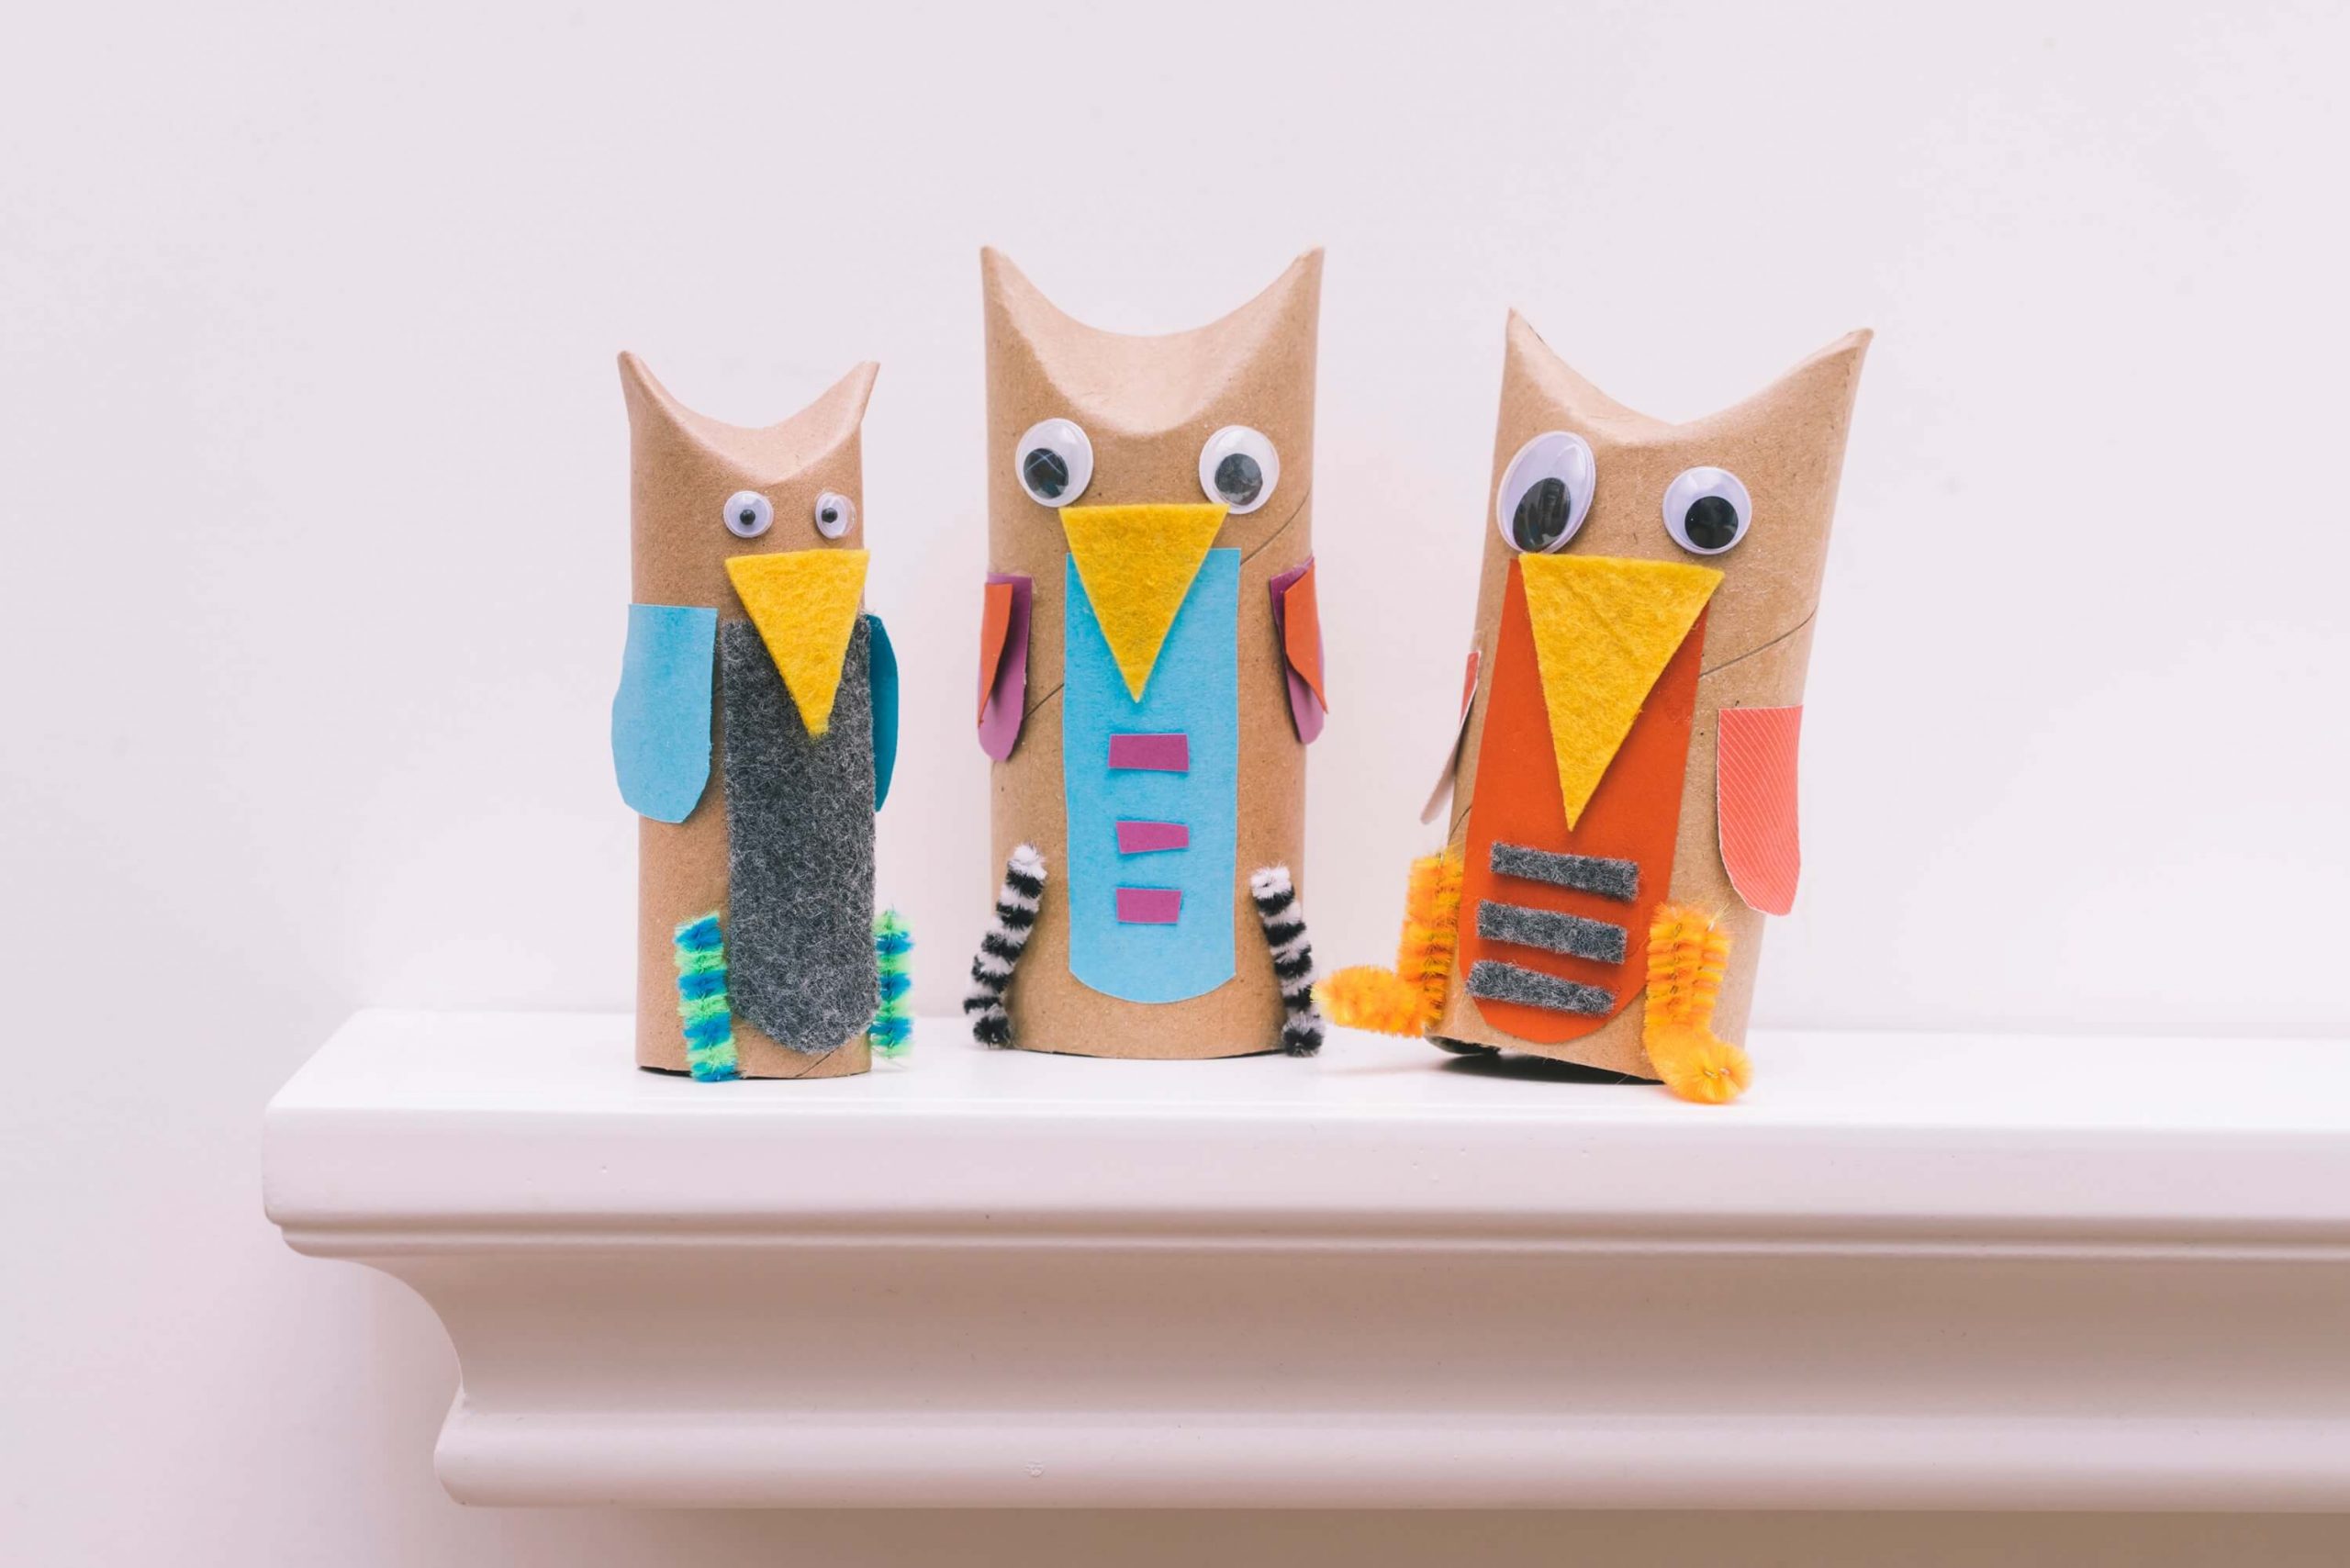 Recycled Material Owl Craft Using Toilet Paper Roll For Kids